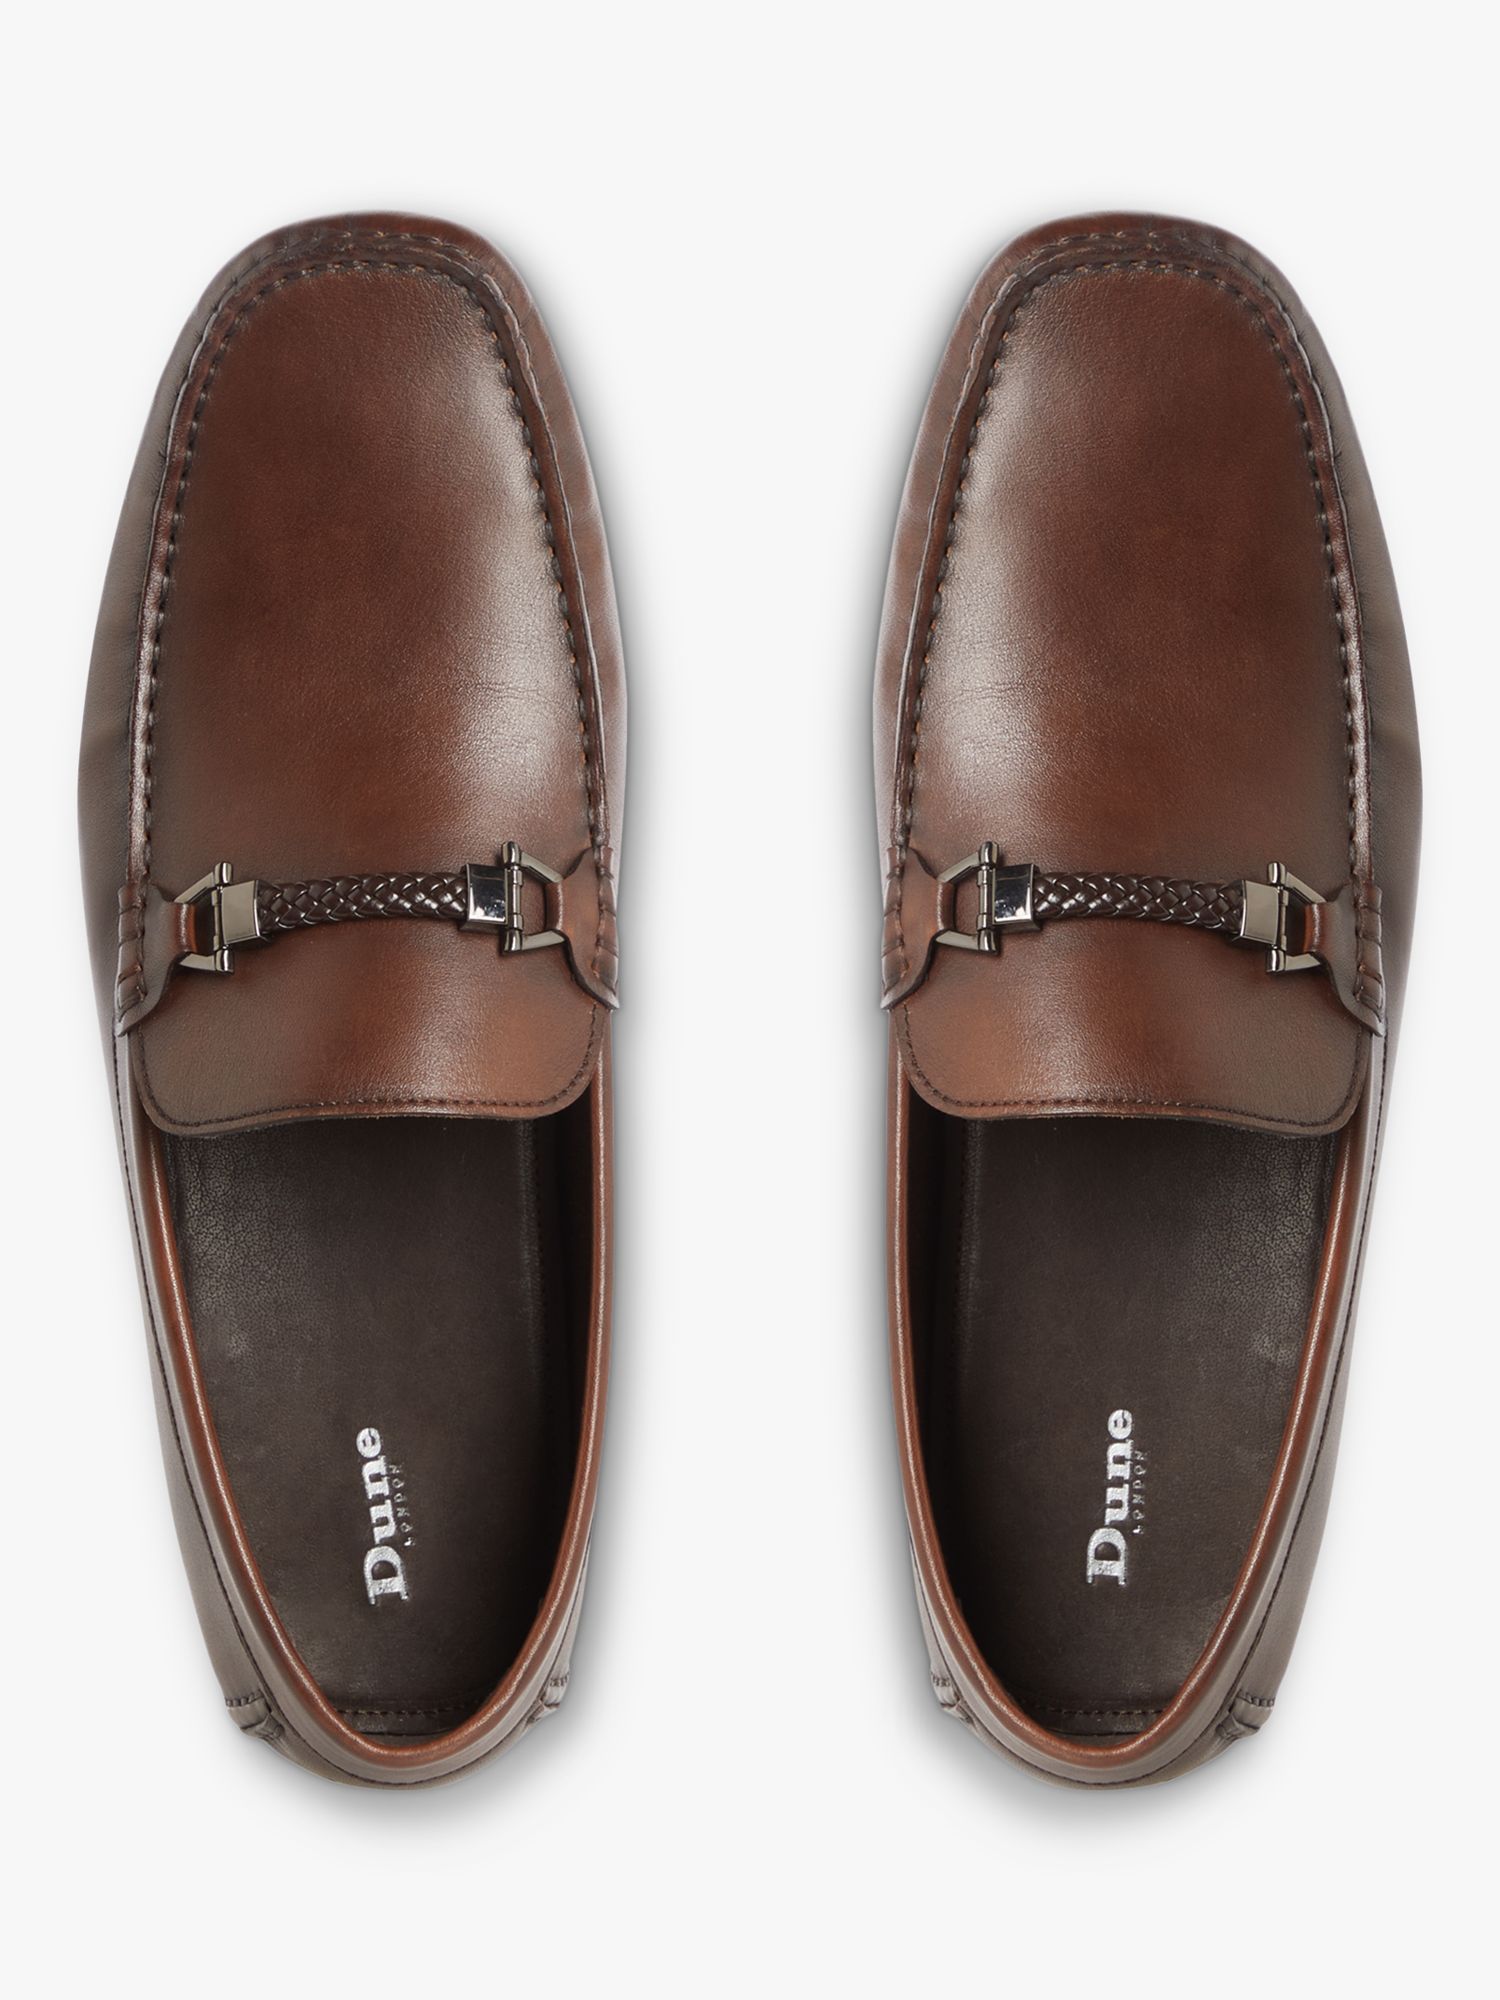 Buy Dune Beacons Leather Loafers Online at johnlewis.com